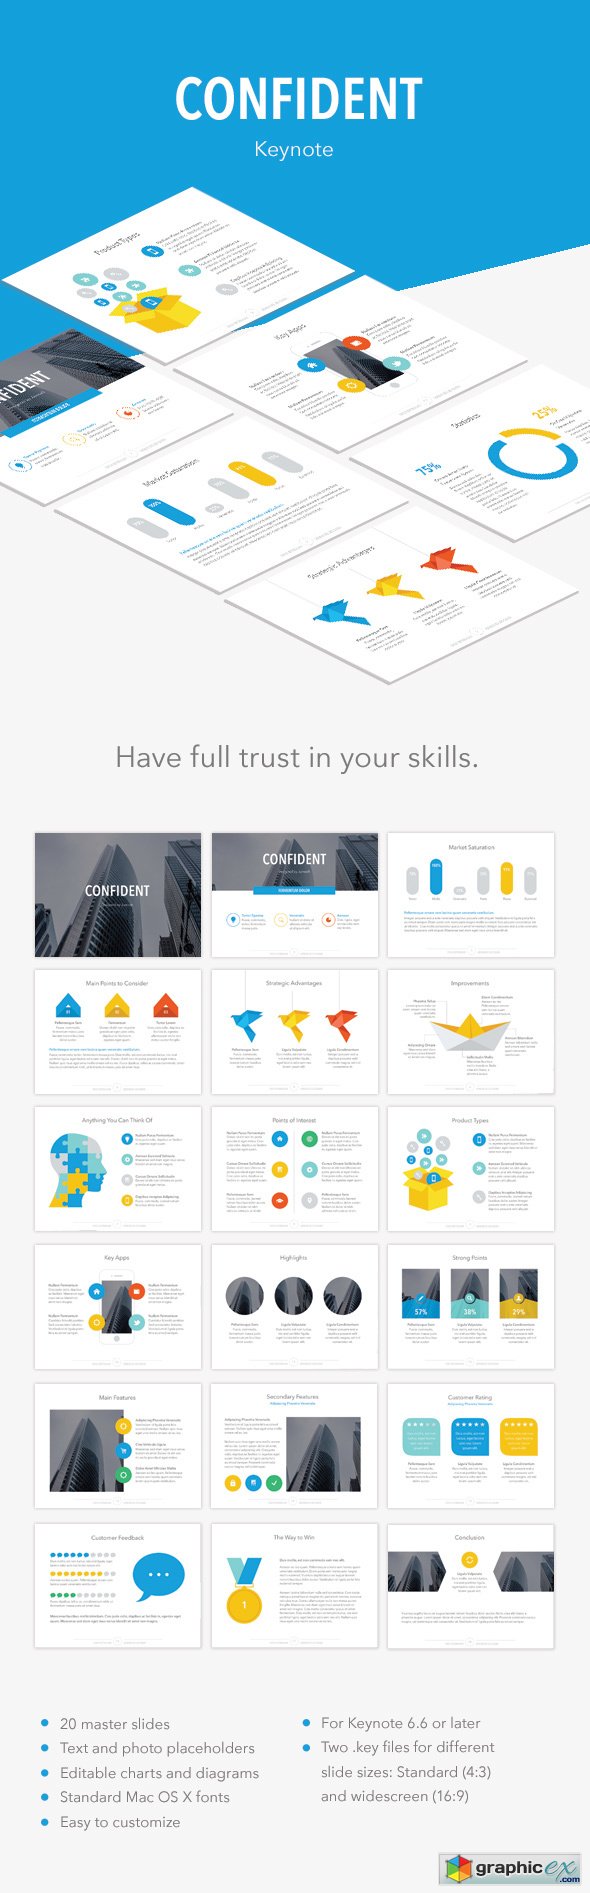 Confident Keynote Template 14574388